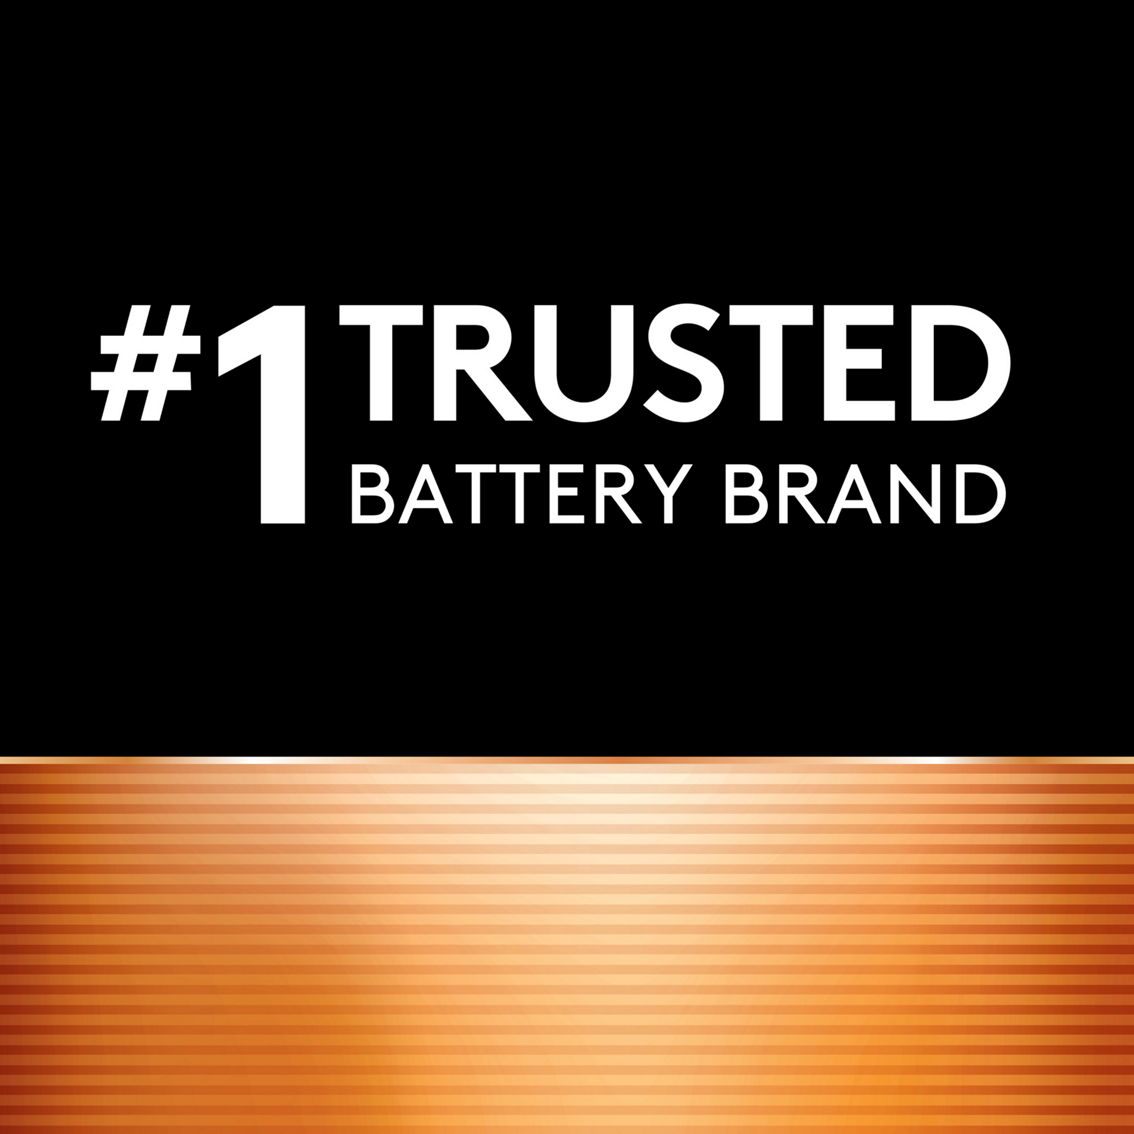 Duracell AA Batteries 16 ct. - Image 5 of 6